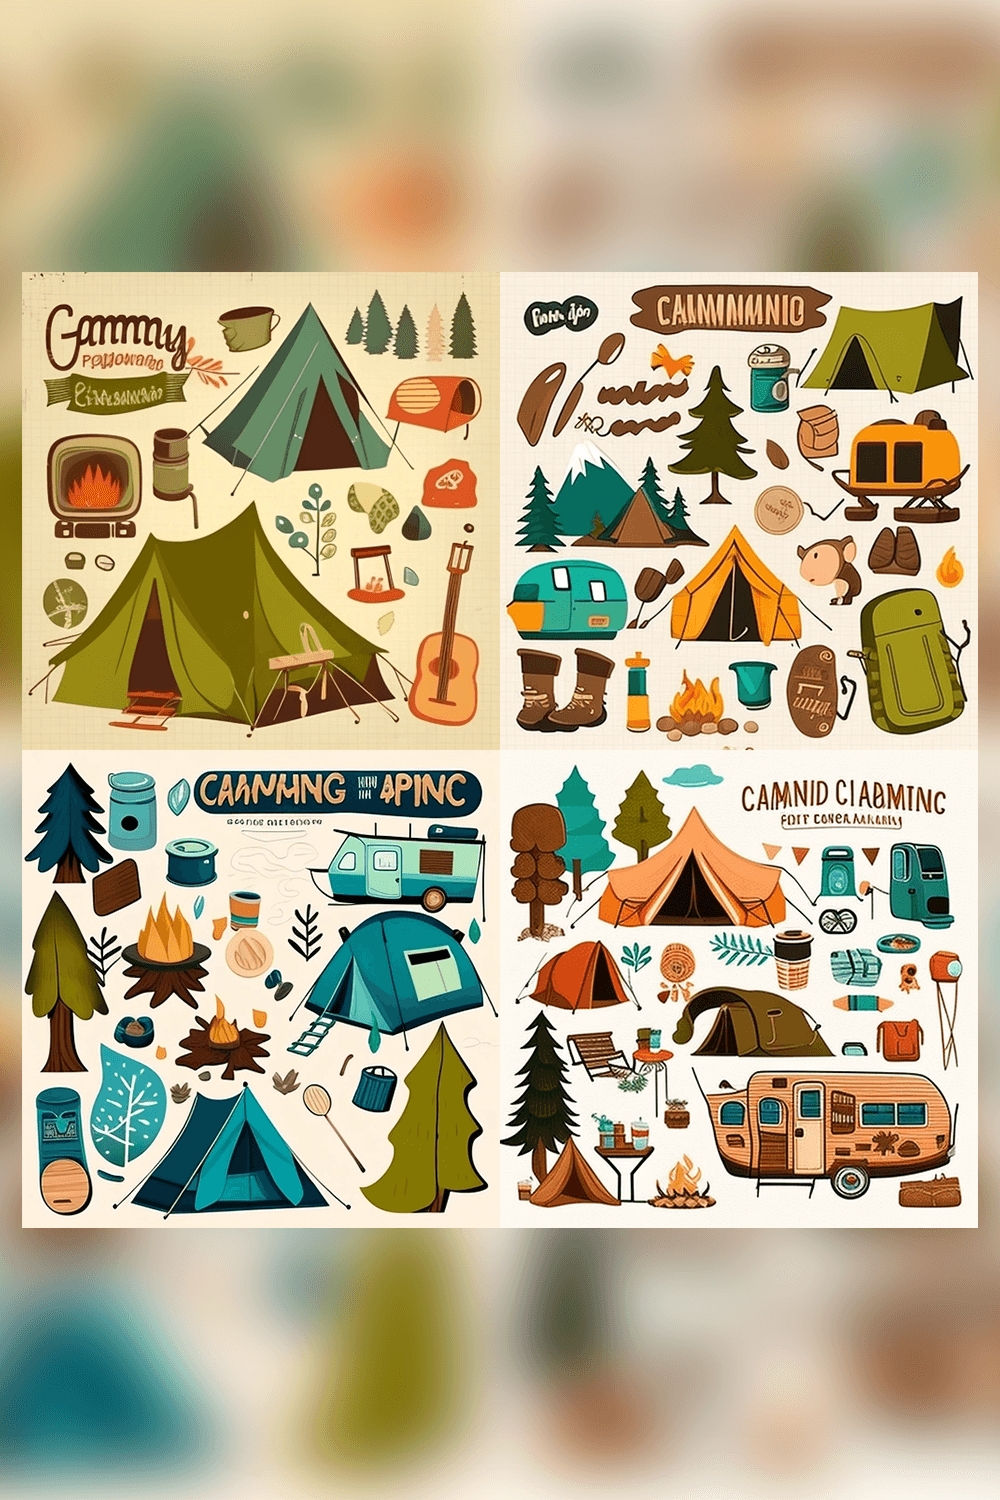 Map of camping with a lot of camping related items.